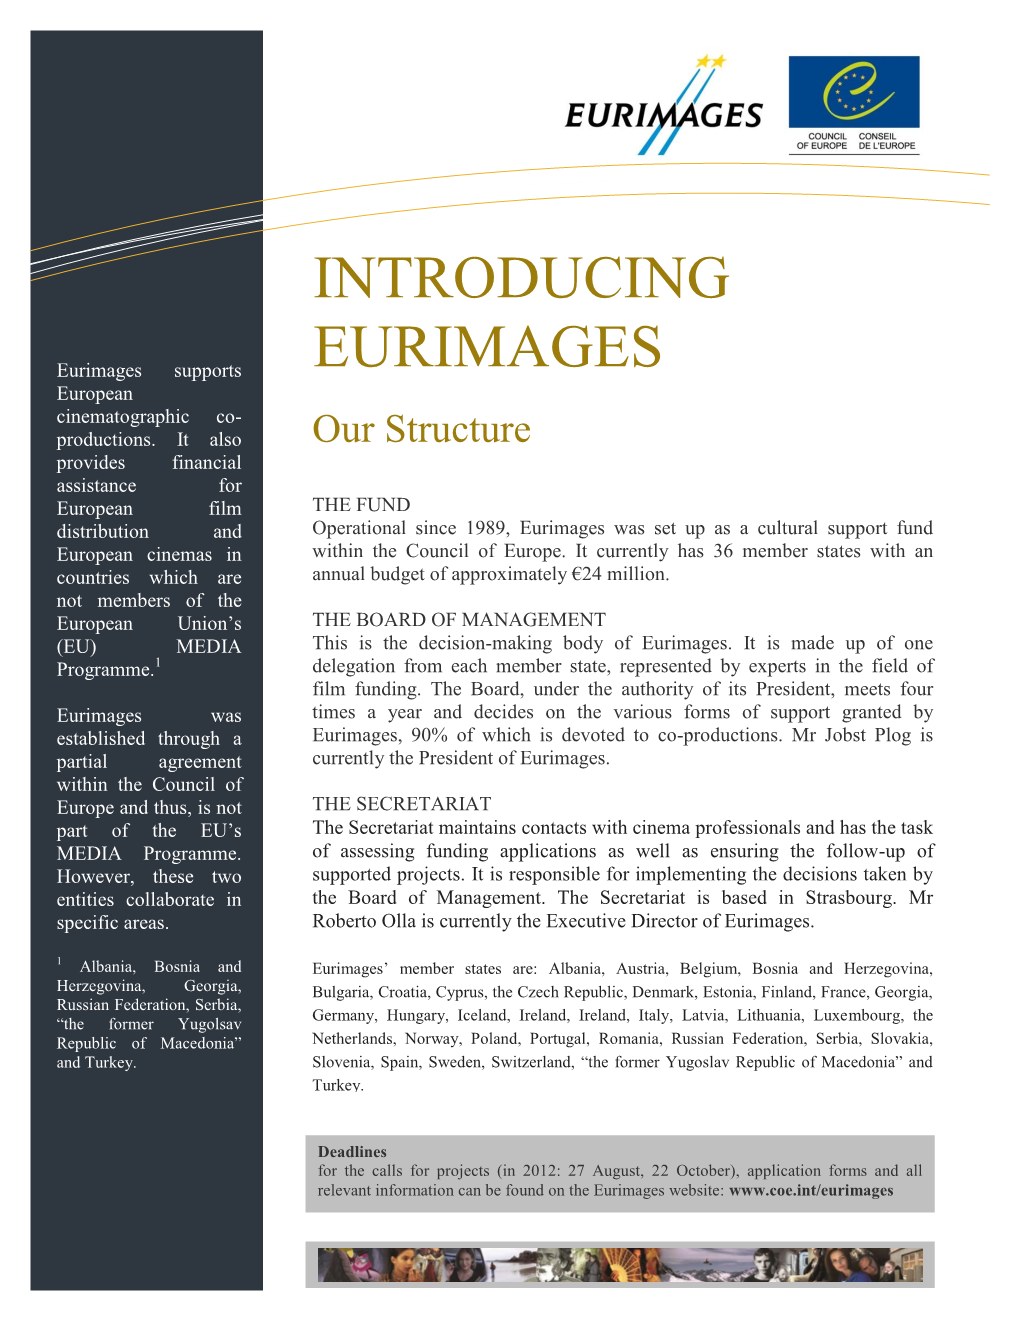 Introducing Eurimages